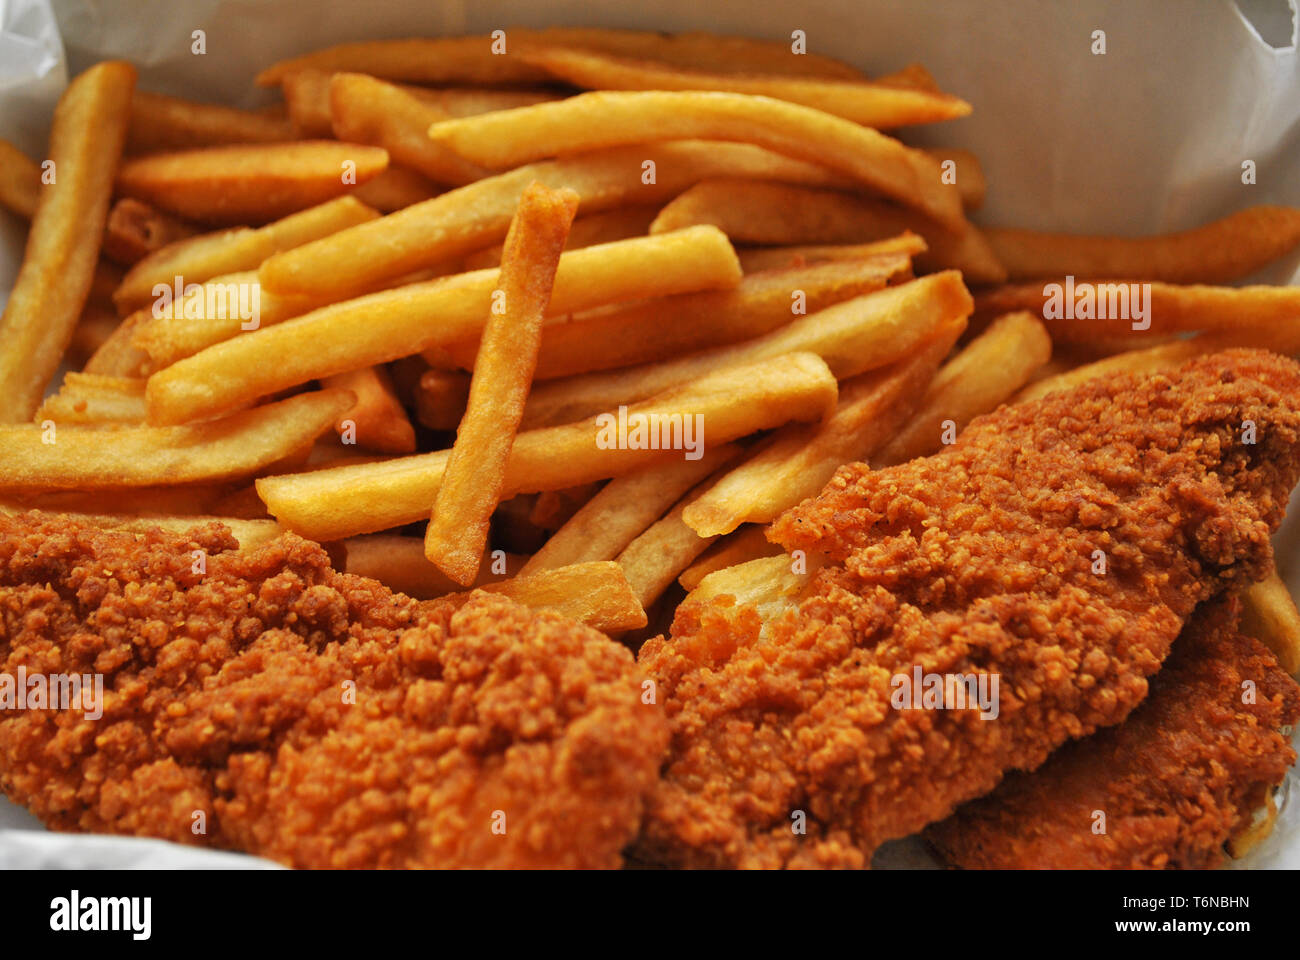 Fried Seafood Dinner in a Takeout Box Stock Photo